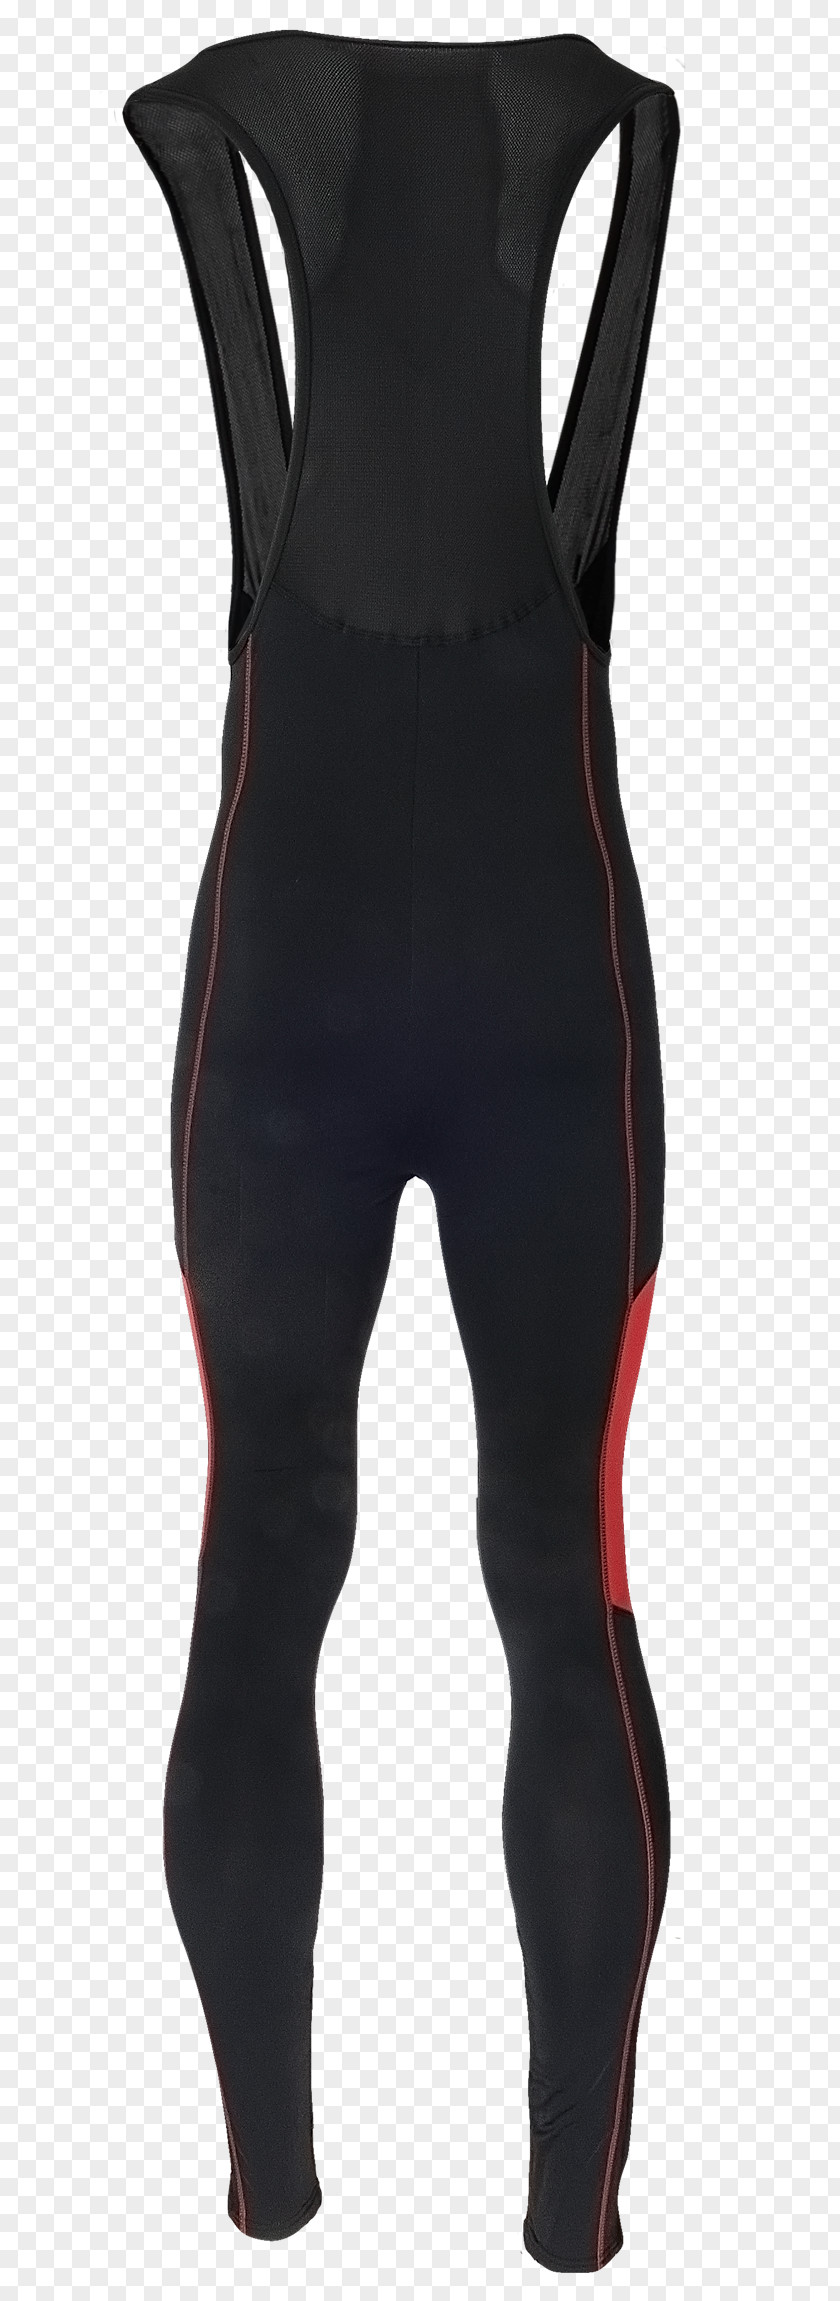 Wetsuit PNG